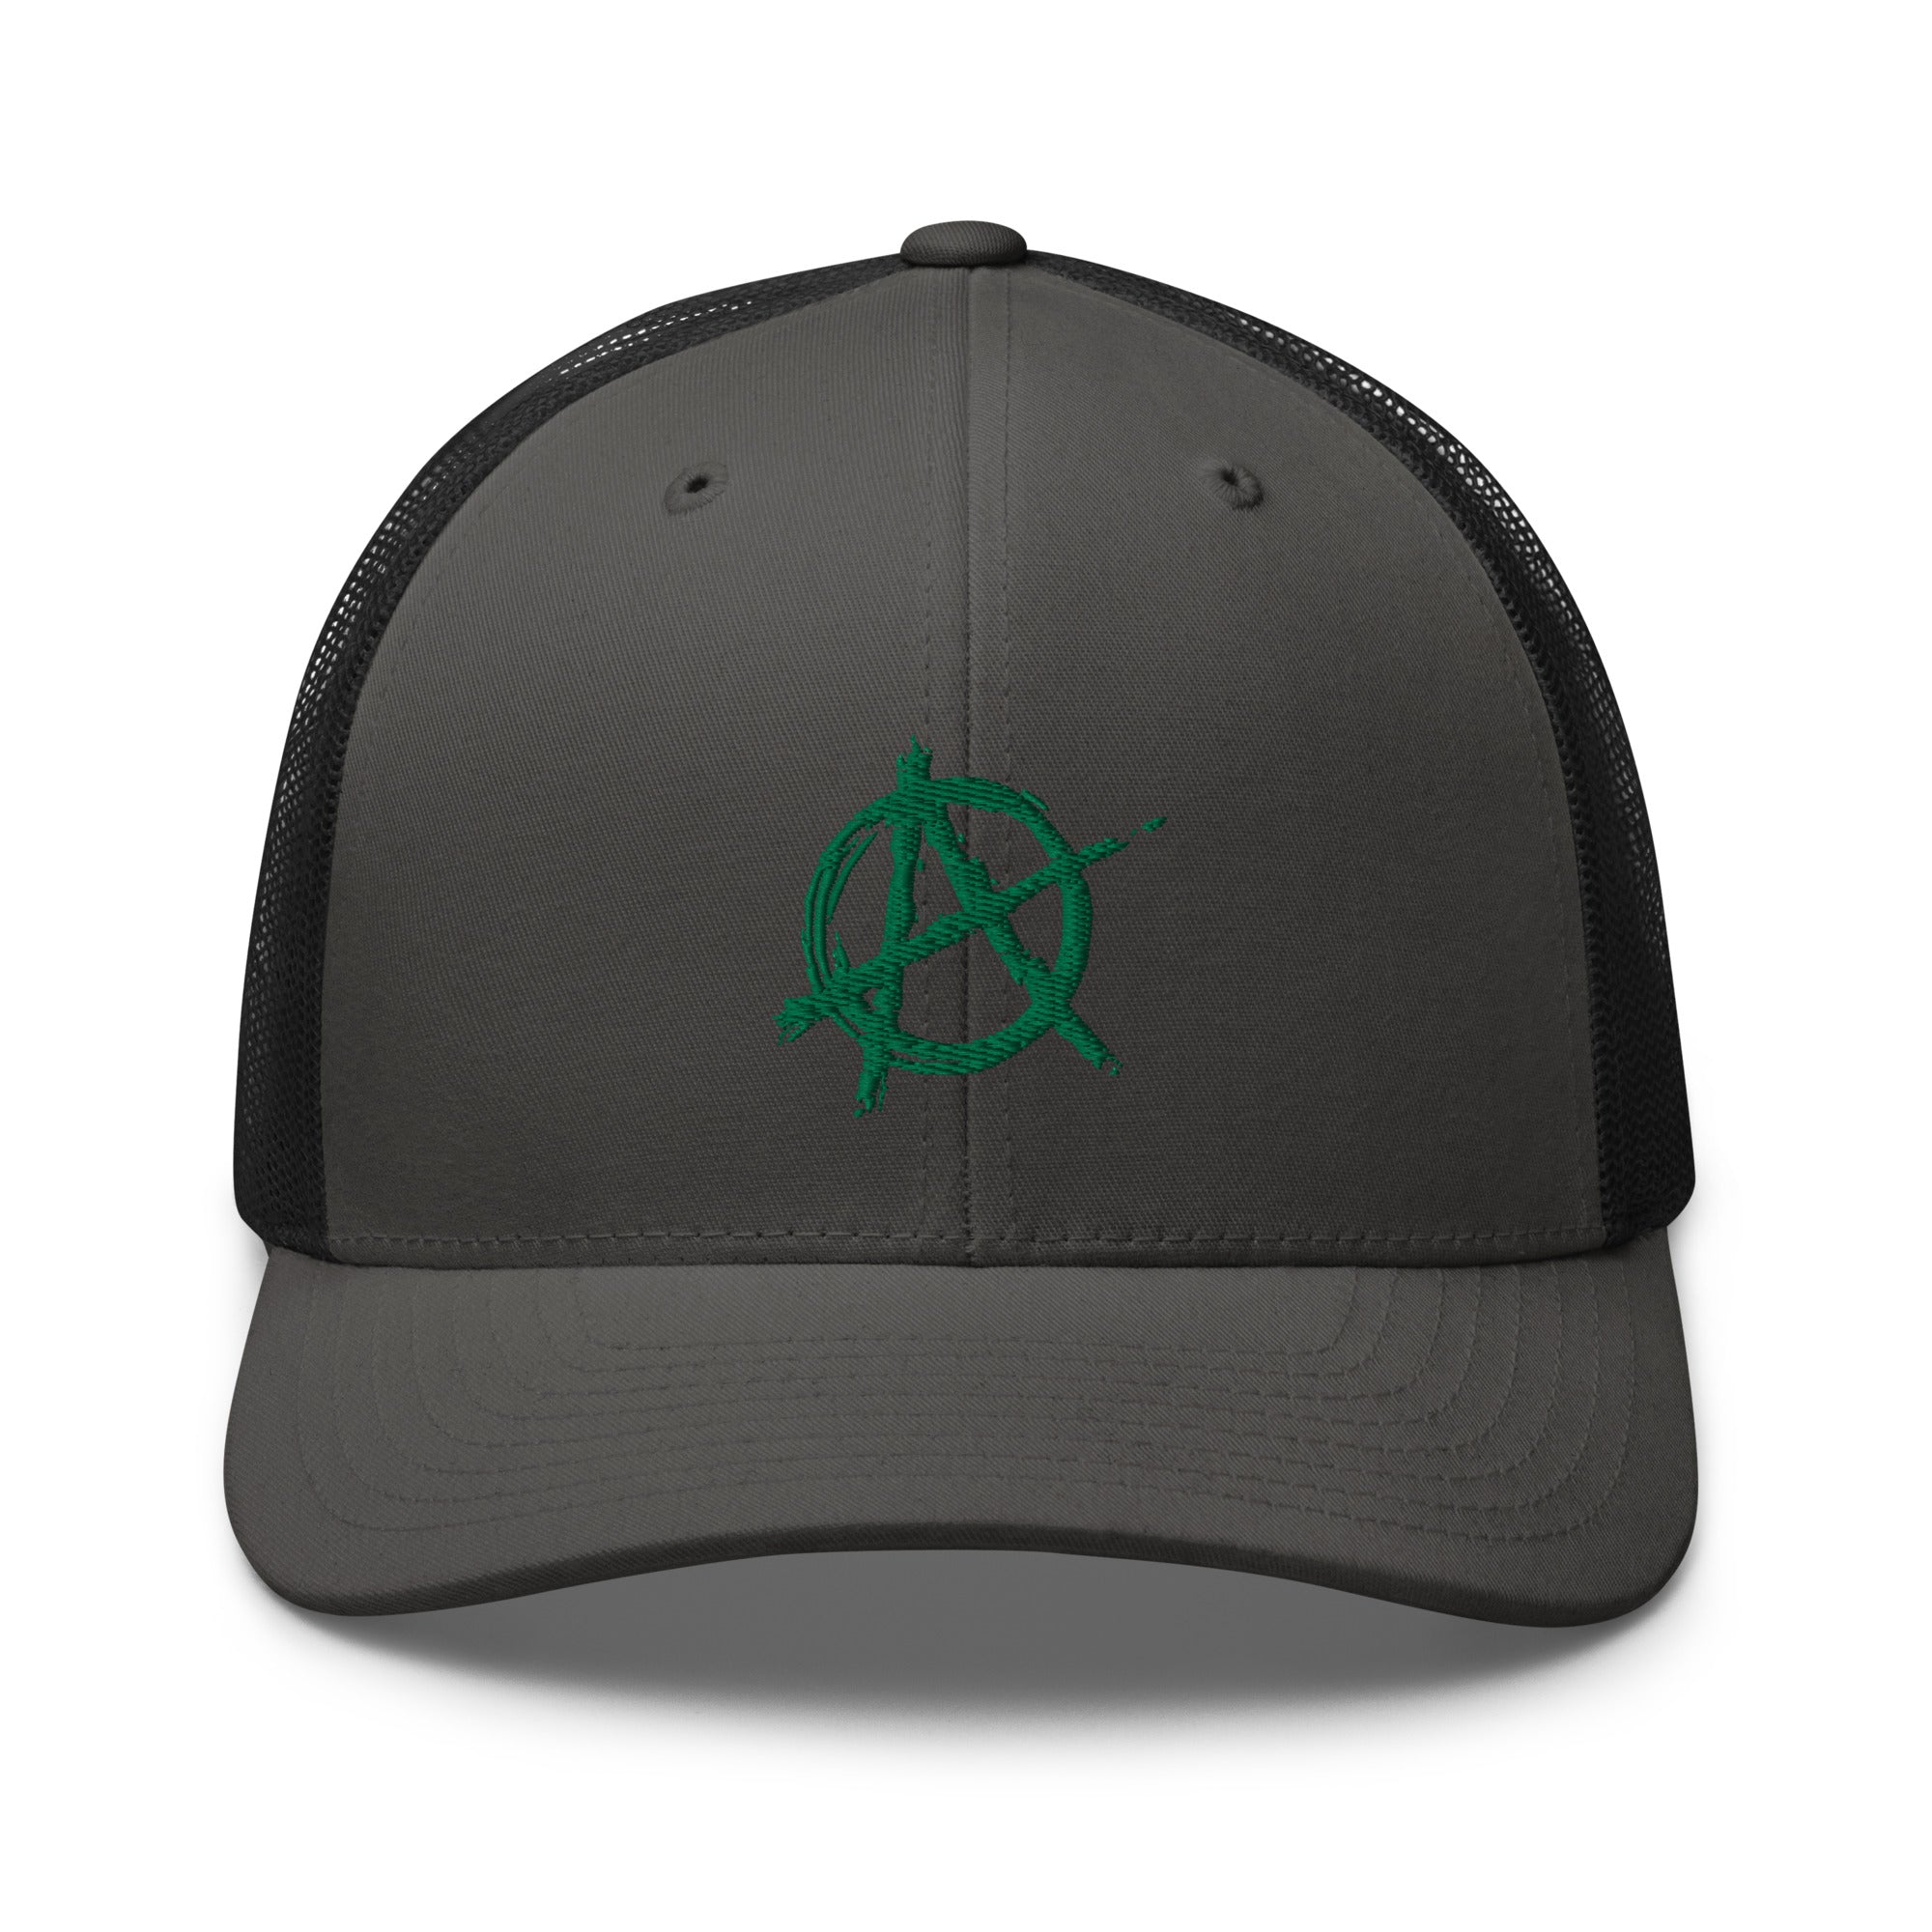 Green Anarchy Sign Punk Rock Chaos Embroidered Retro Trucker Cap Snapback Hat